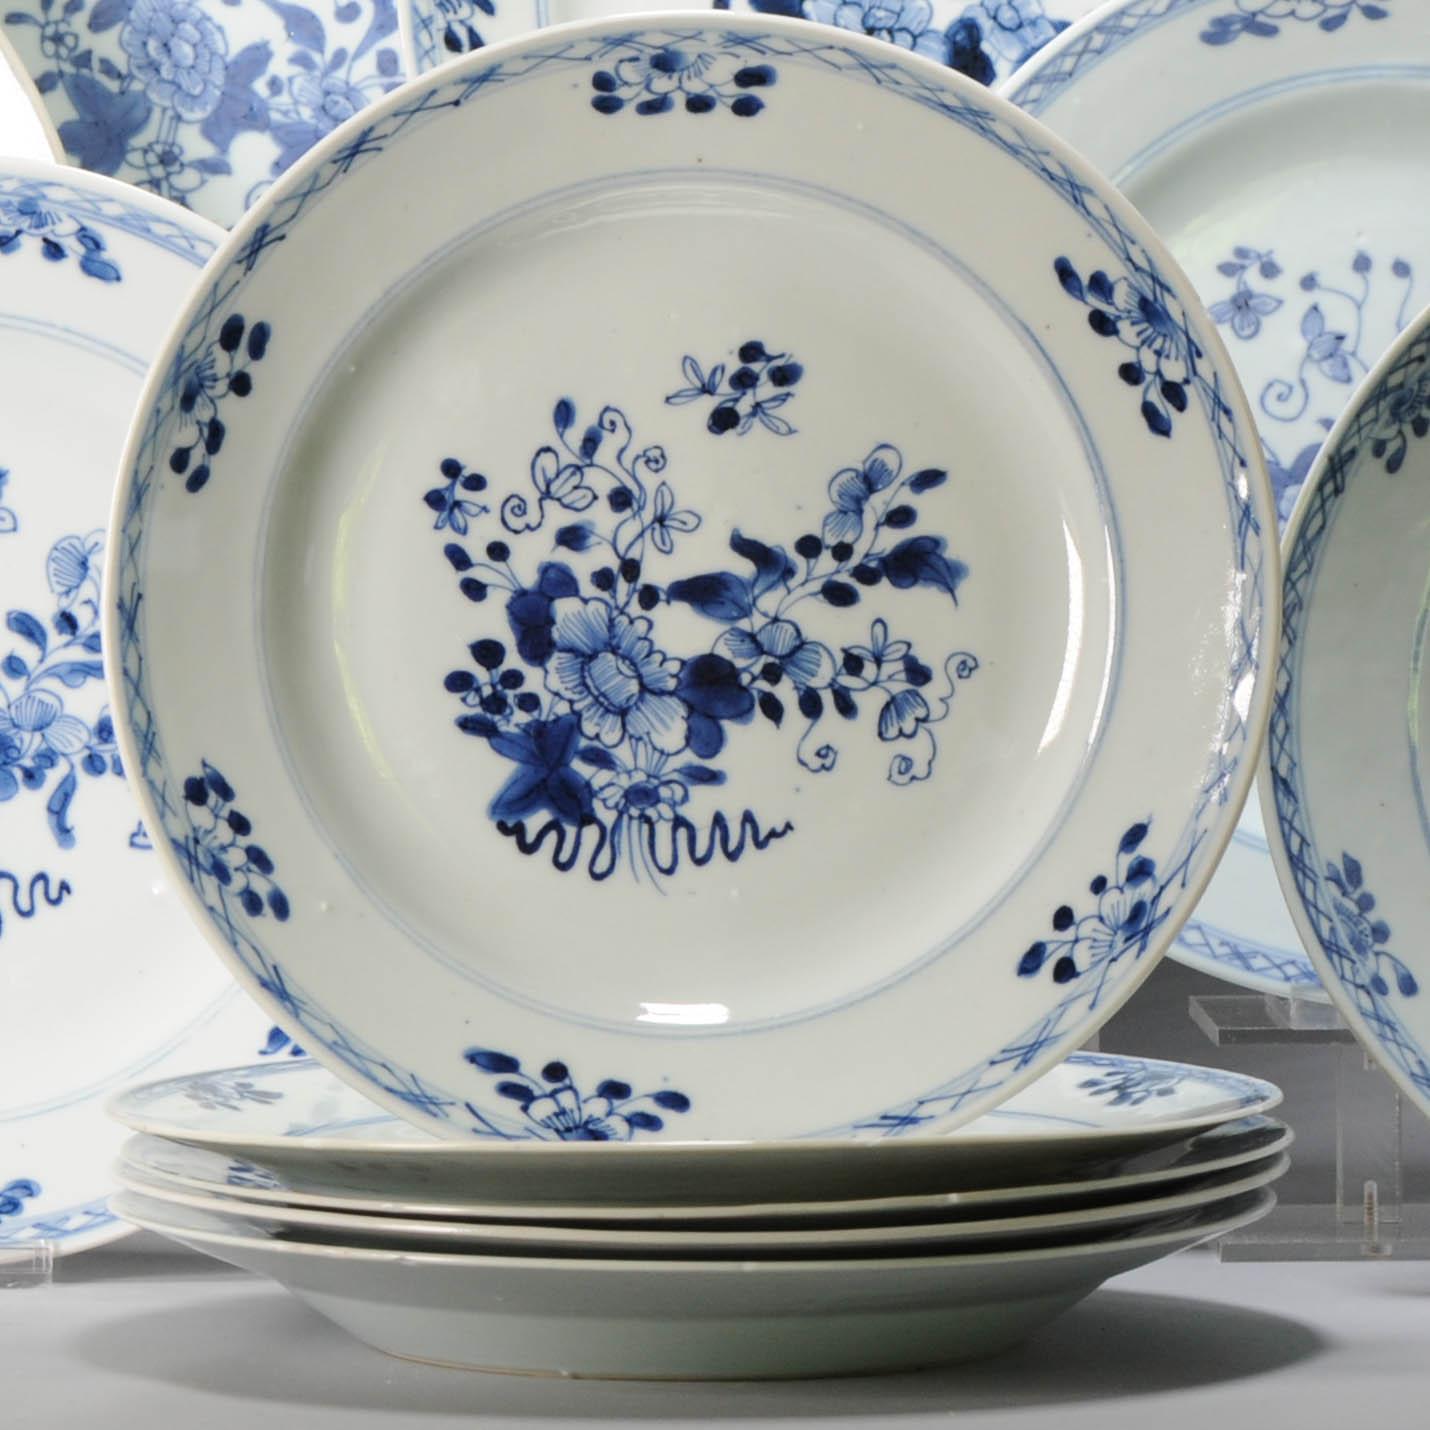 Set of 13 Antique Chinese Porcelain Qing Period Blue White Set Dinner Plates In Good Condition For Sale In Amsterdam, Noord Holland